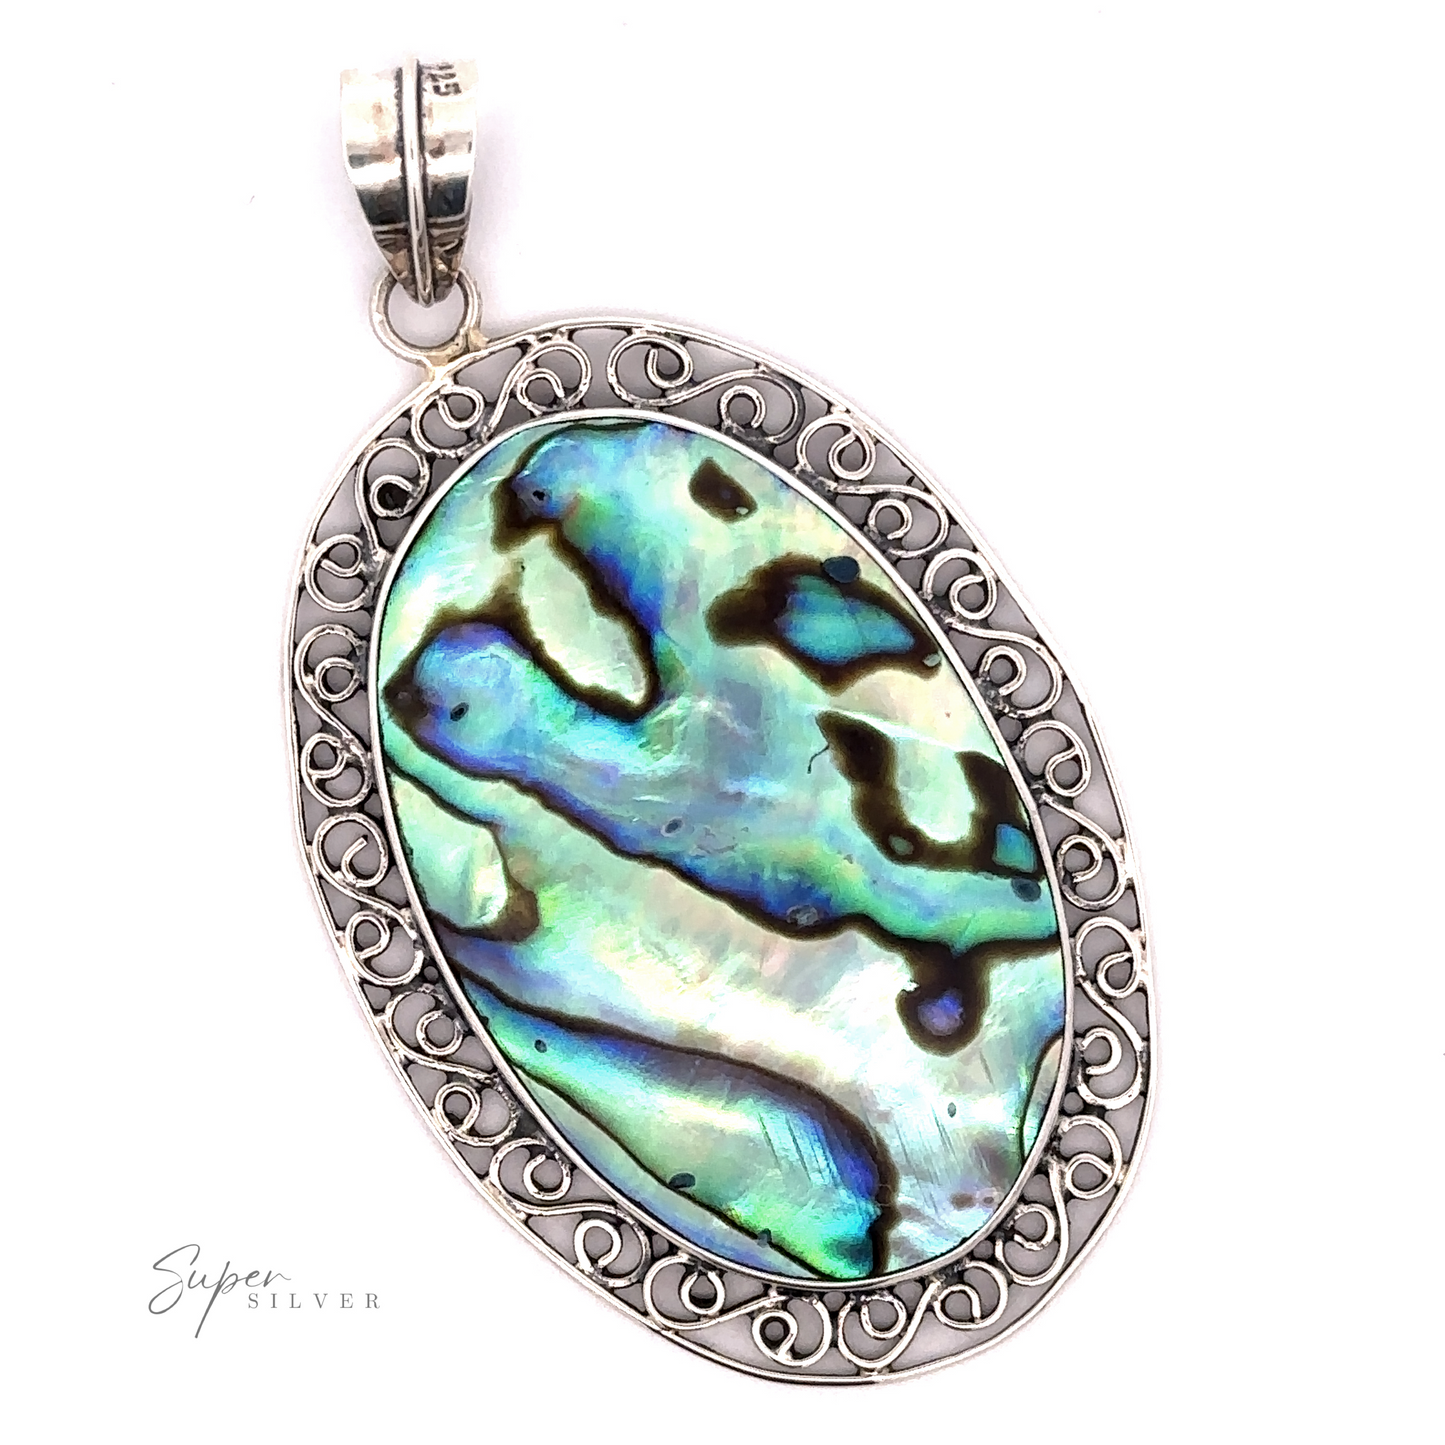 
                  
                    Oval Abalone Pendant with Filigree Border with ornate sterling silver frame and attached bail, labeled "Super Silver" in the bottom left corner.
                  
                